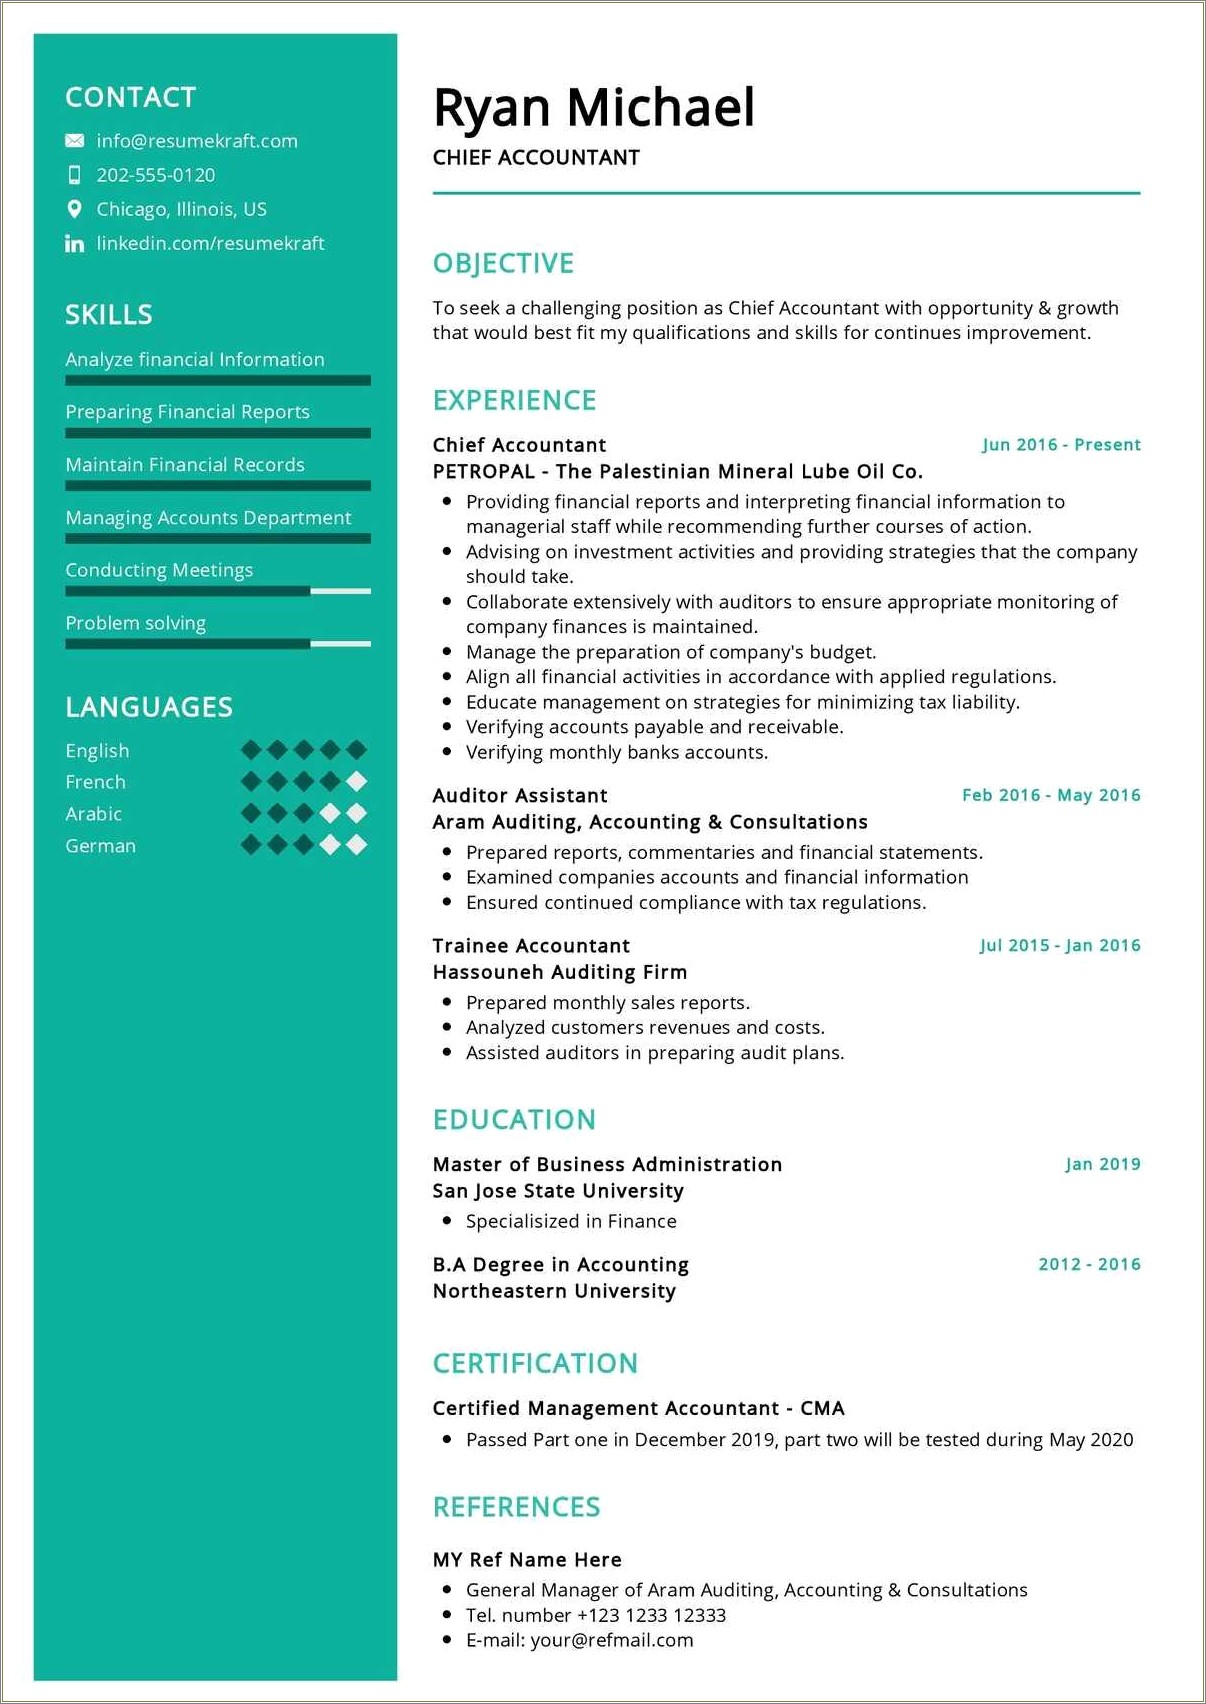 Description Of Education Accounting On Resume